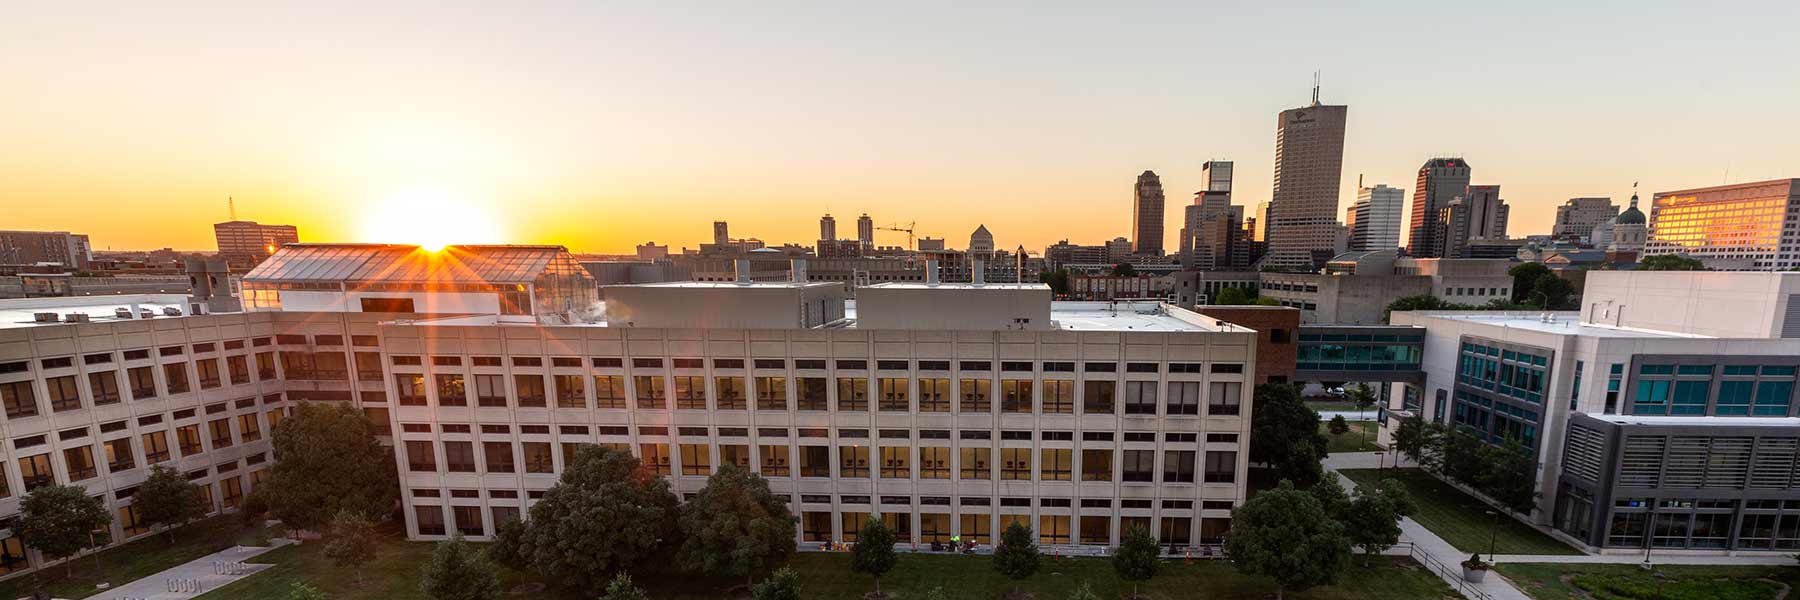 A view of the Indianapolis skyline from campus at sunrise